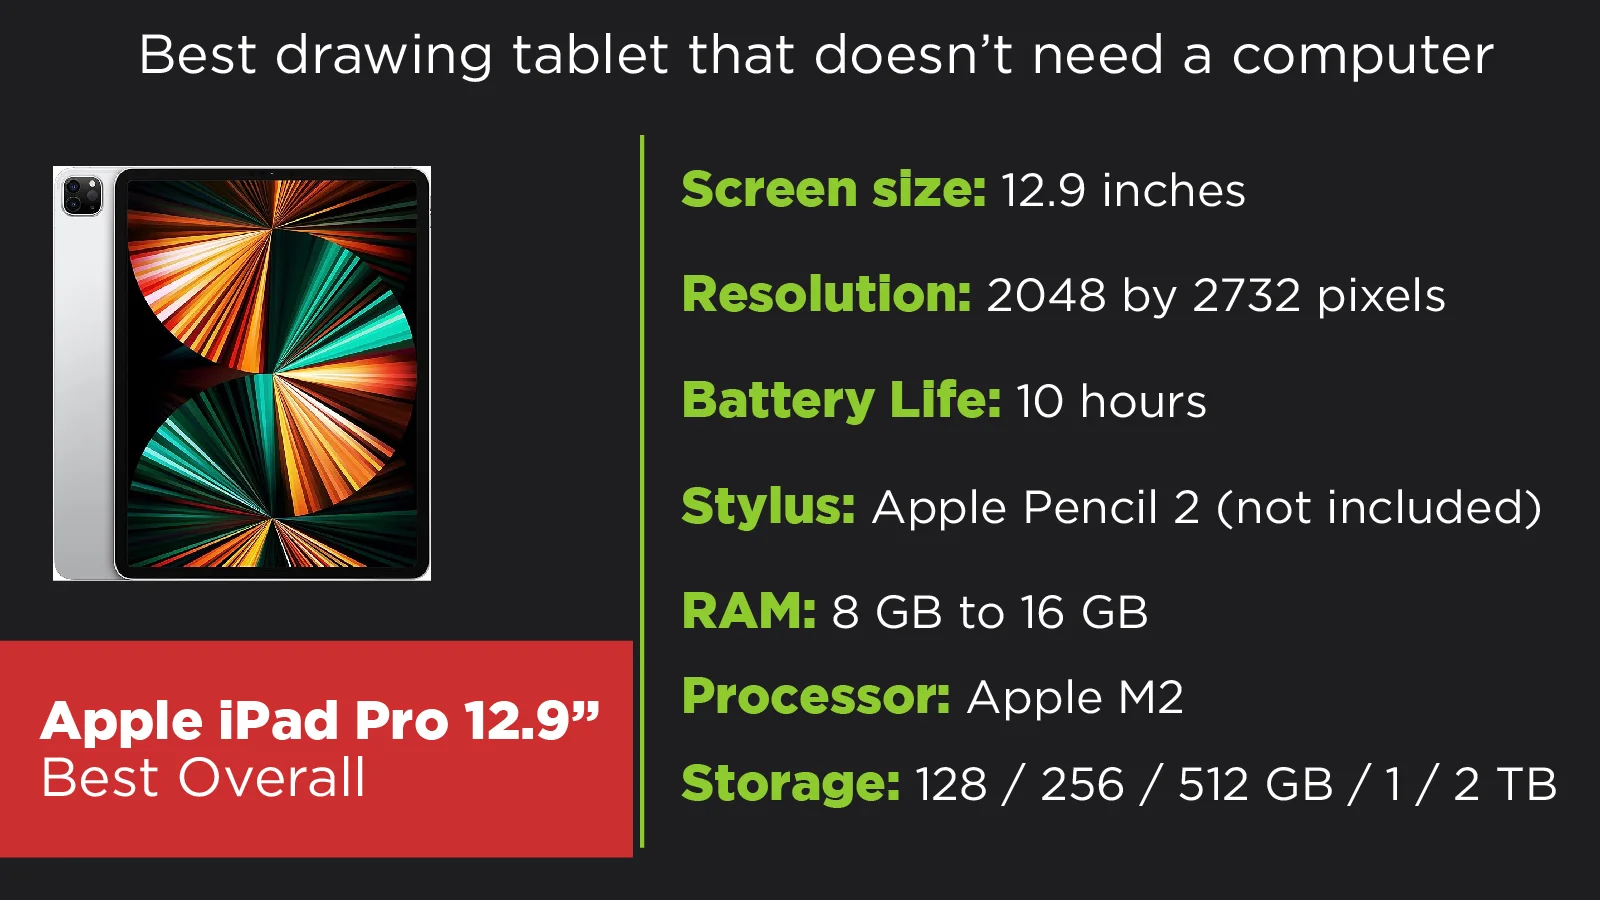 Drawing Tablets That don't need a computer